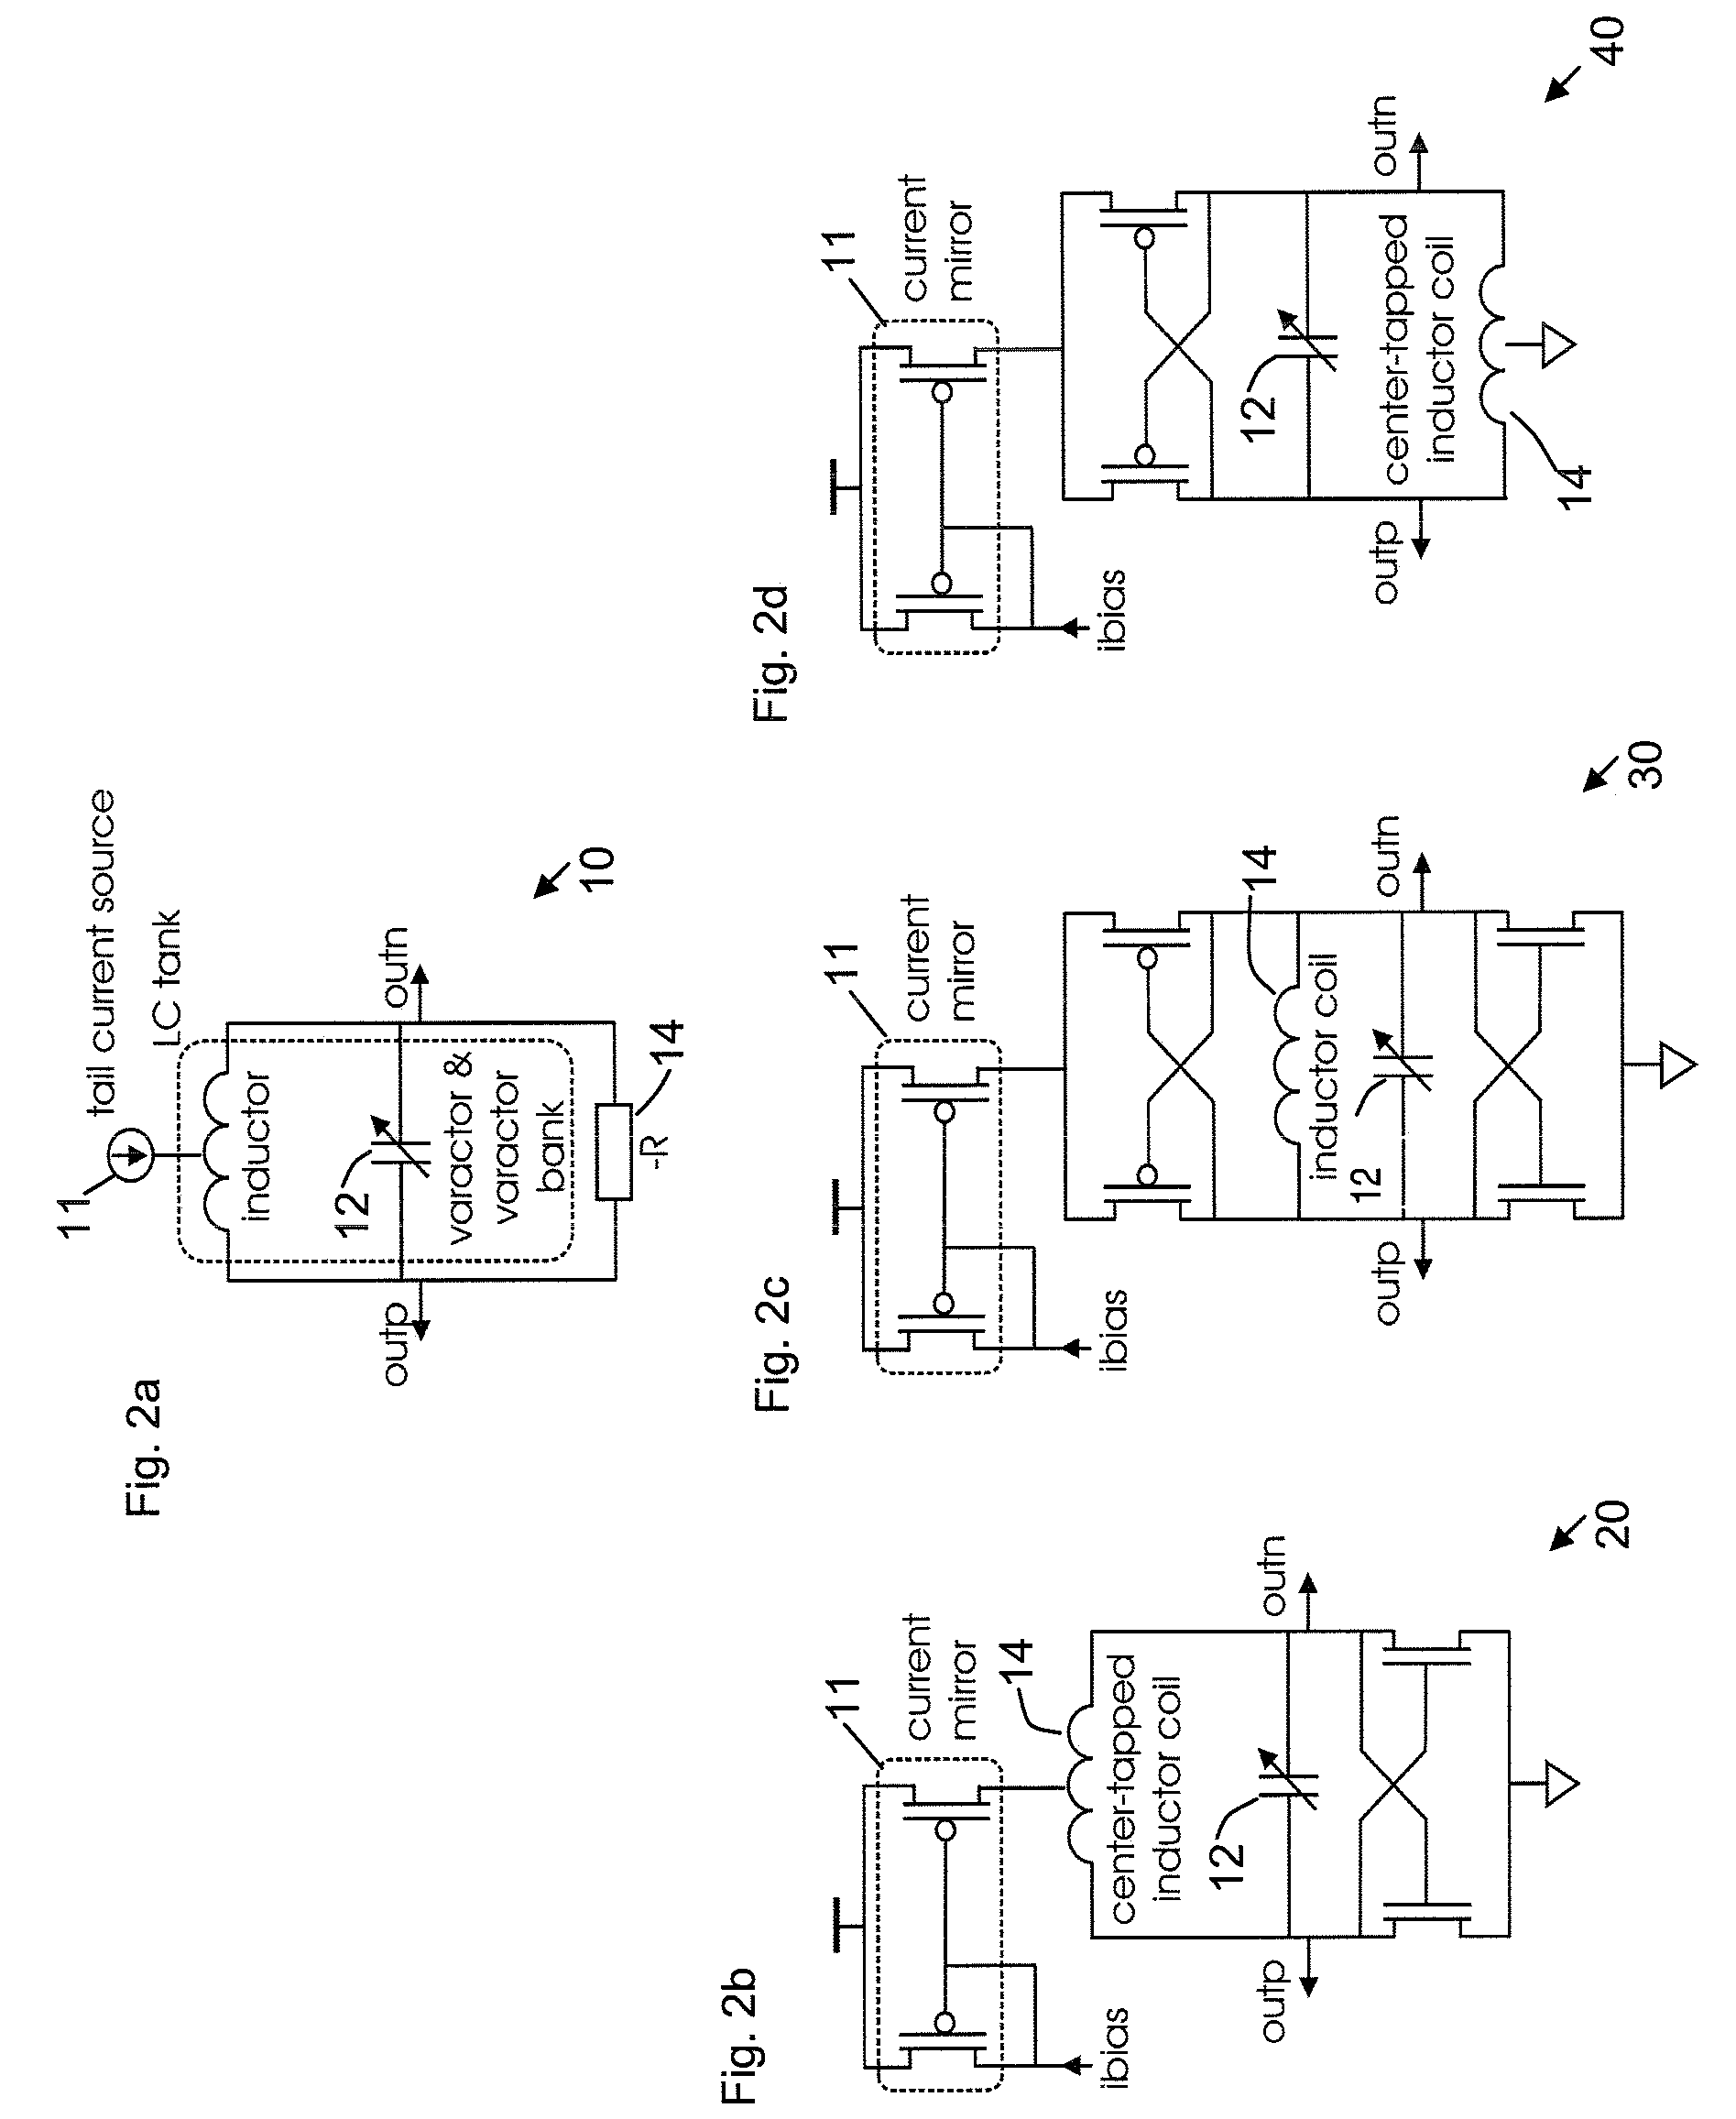 Varactor bank switching based on negative control voltage generation